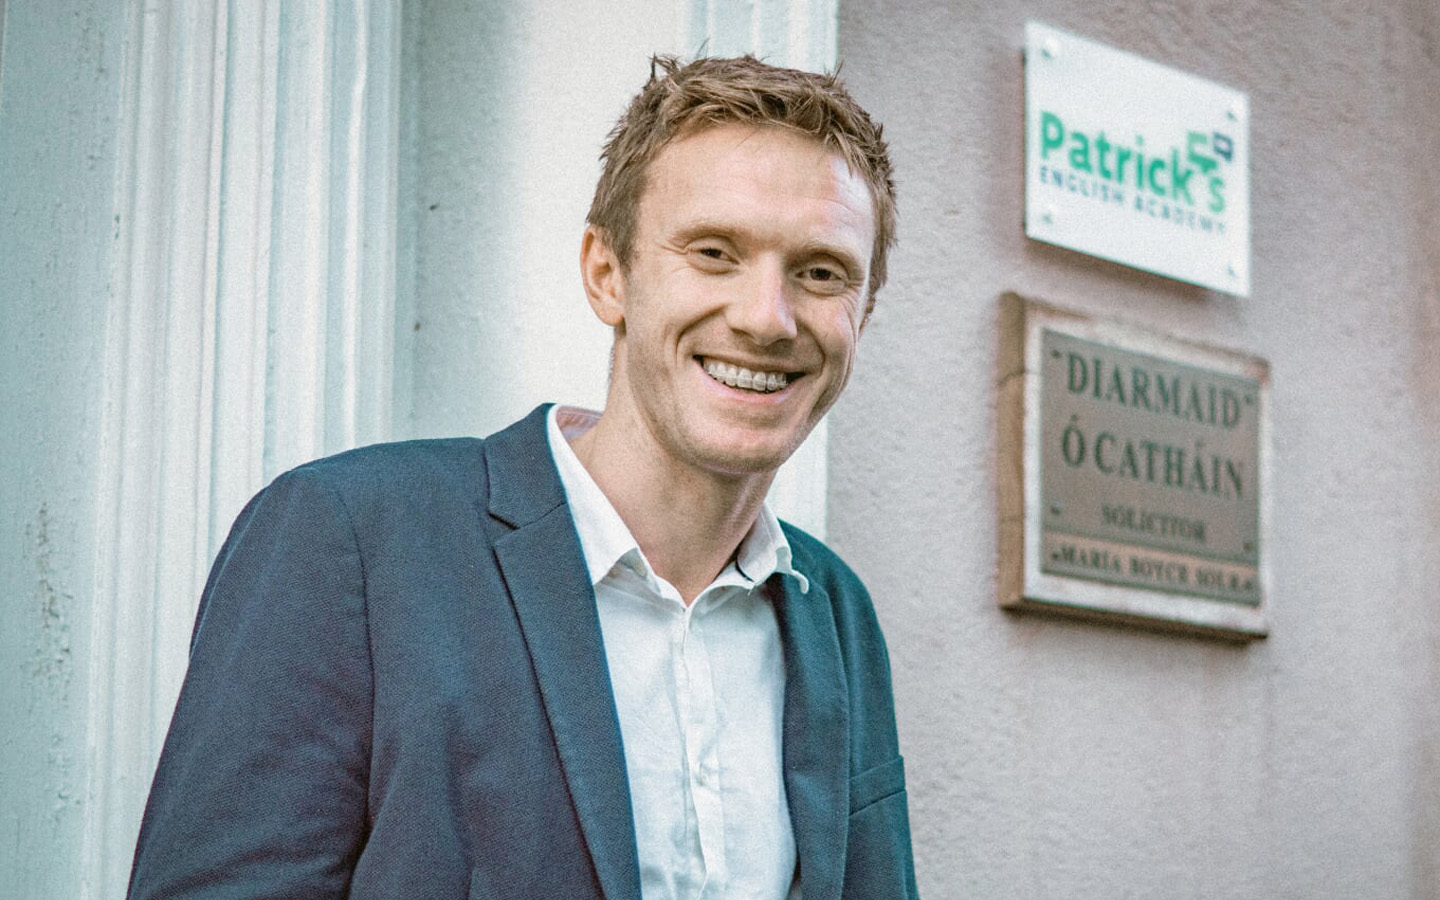 Patrick McCarthy, Owner of Patrick's English Academy